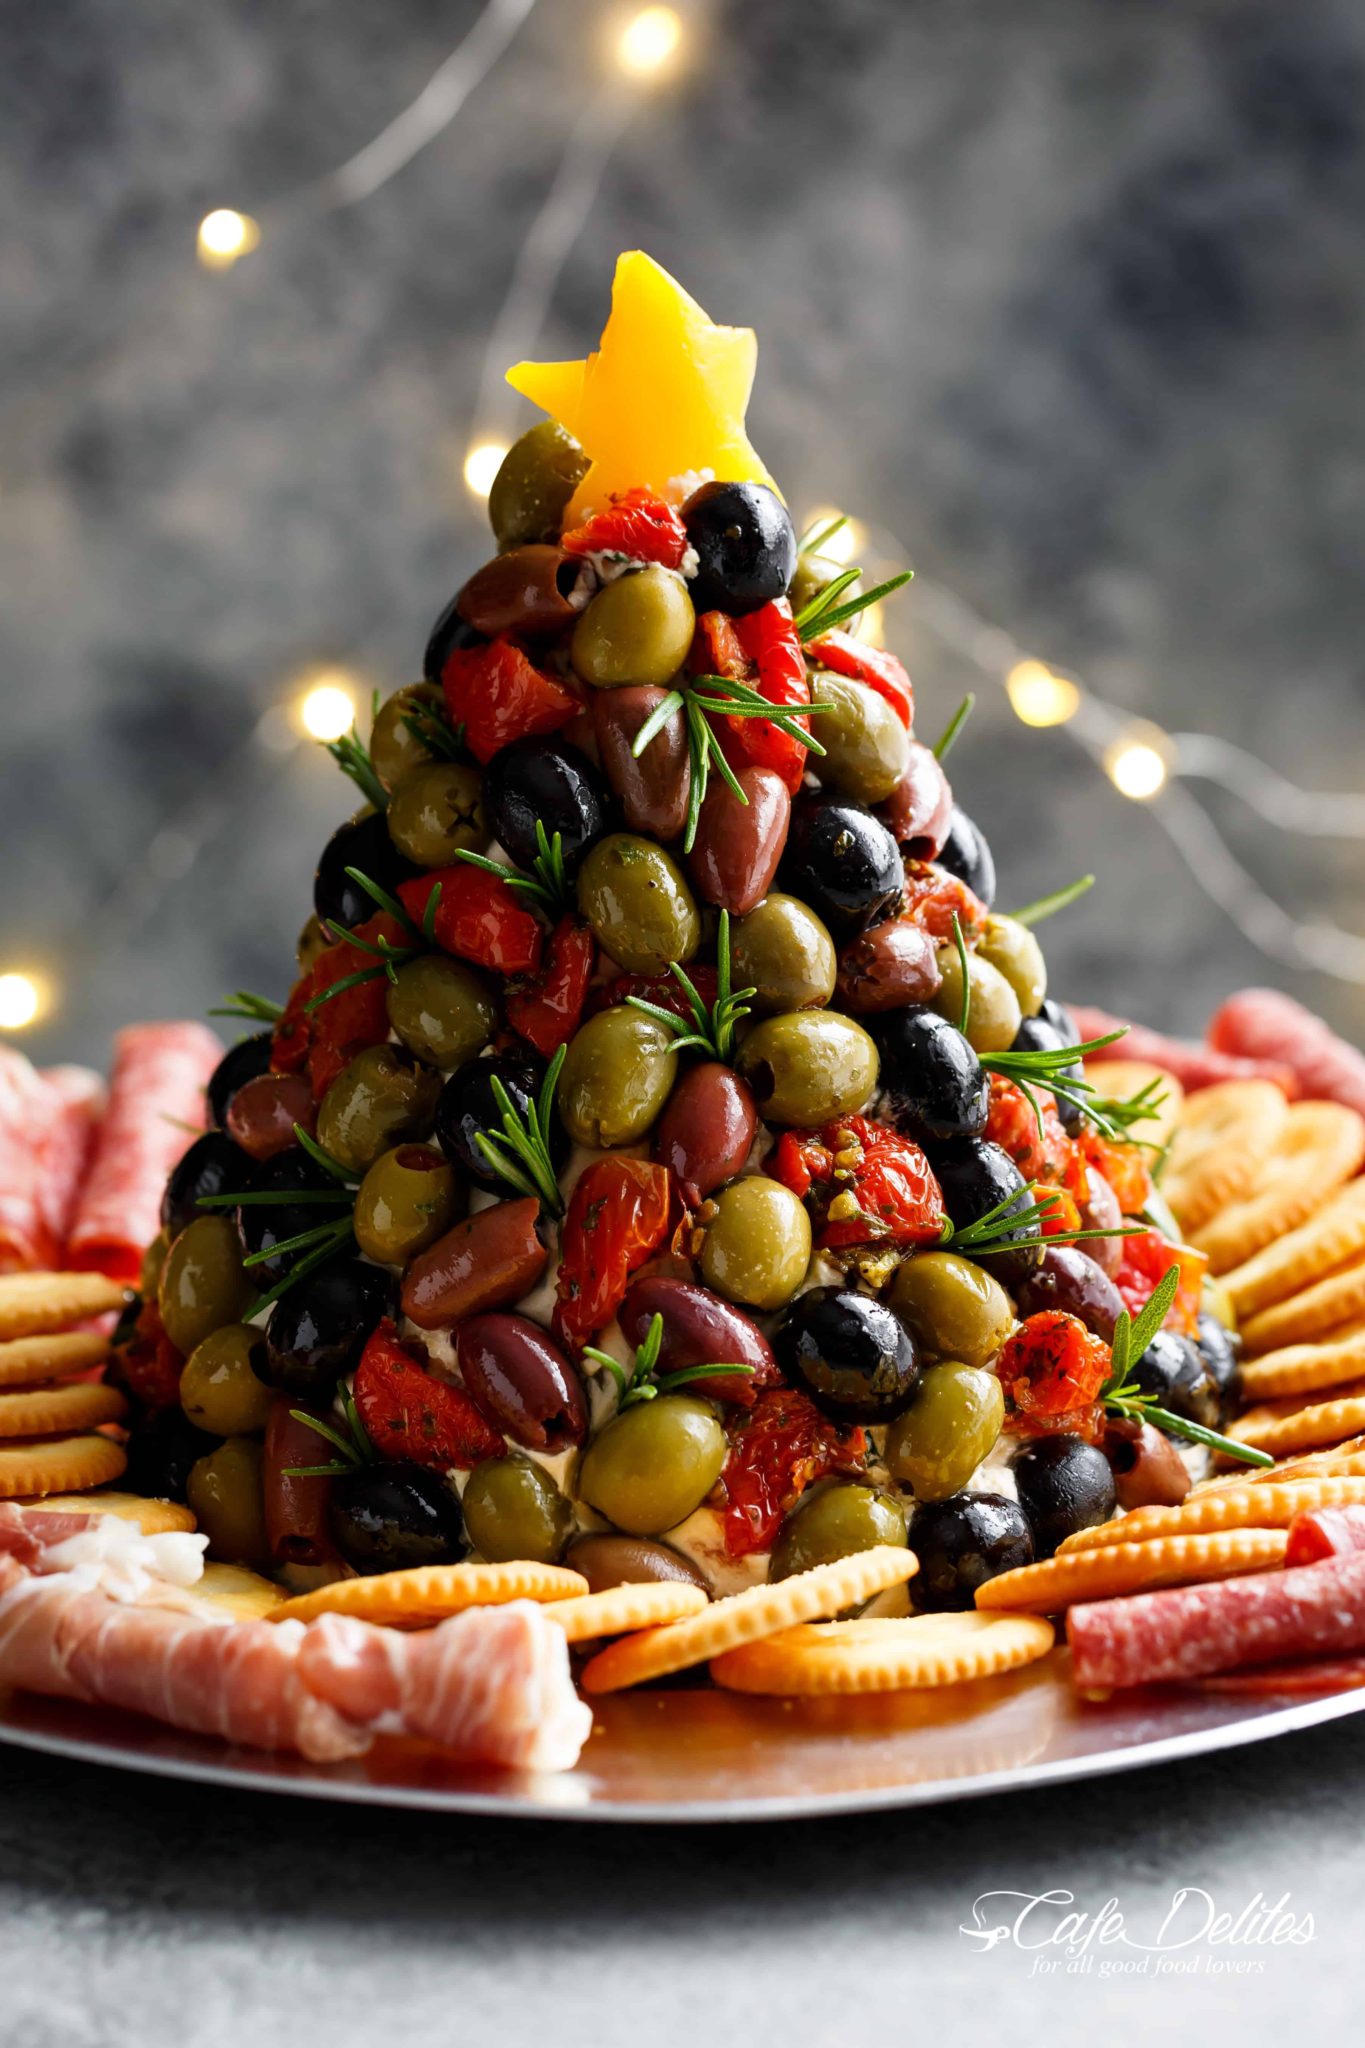 19 Make ahead Christmas appetizers you must try this holiday season - juelzjohn